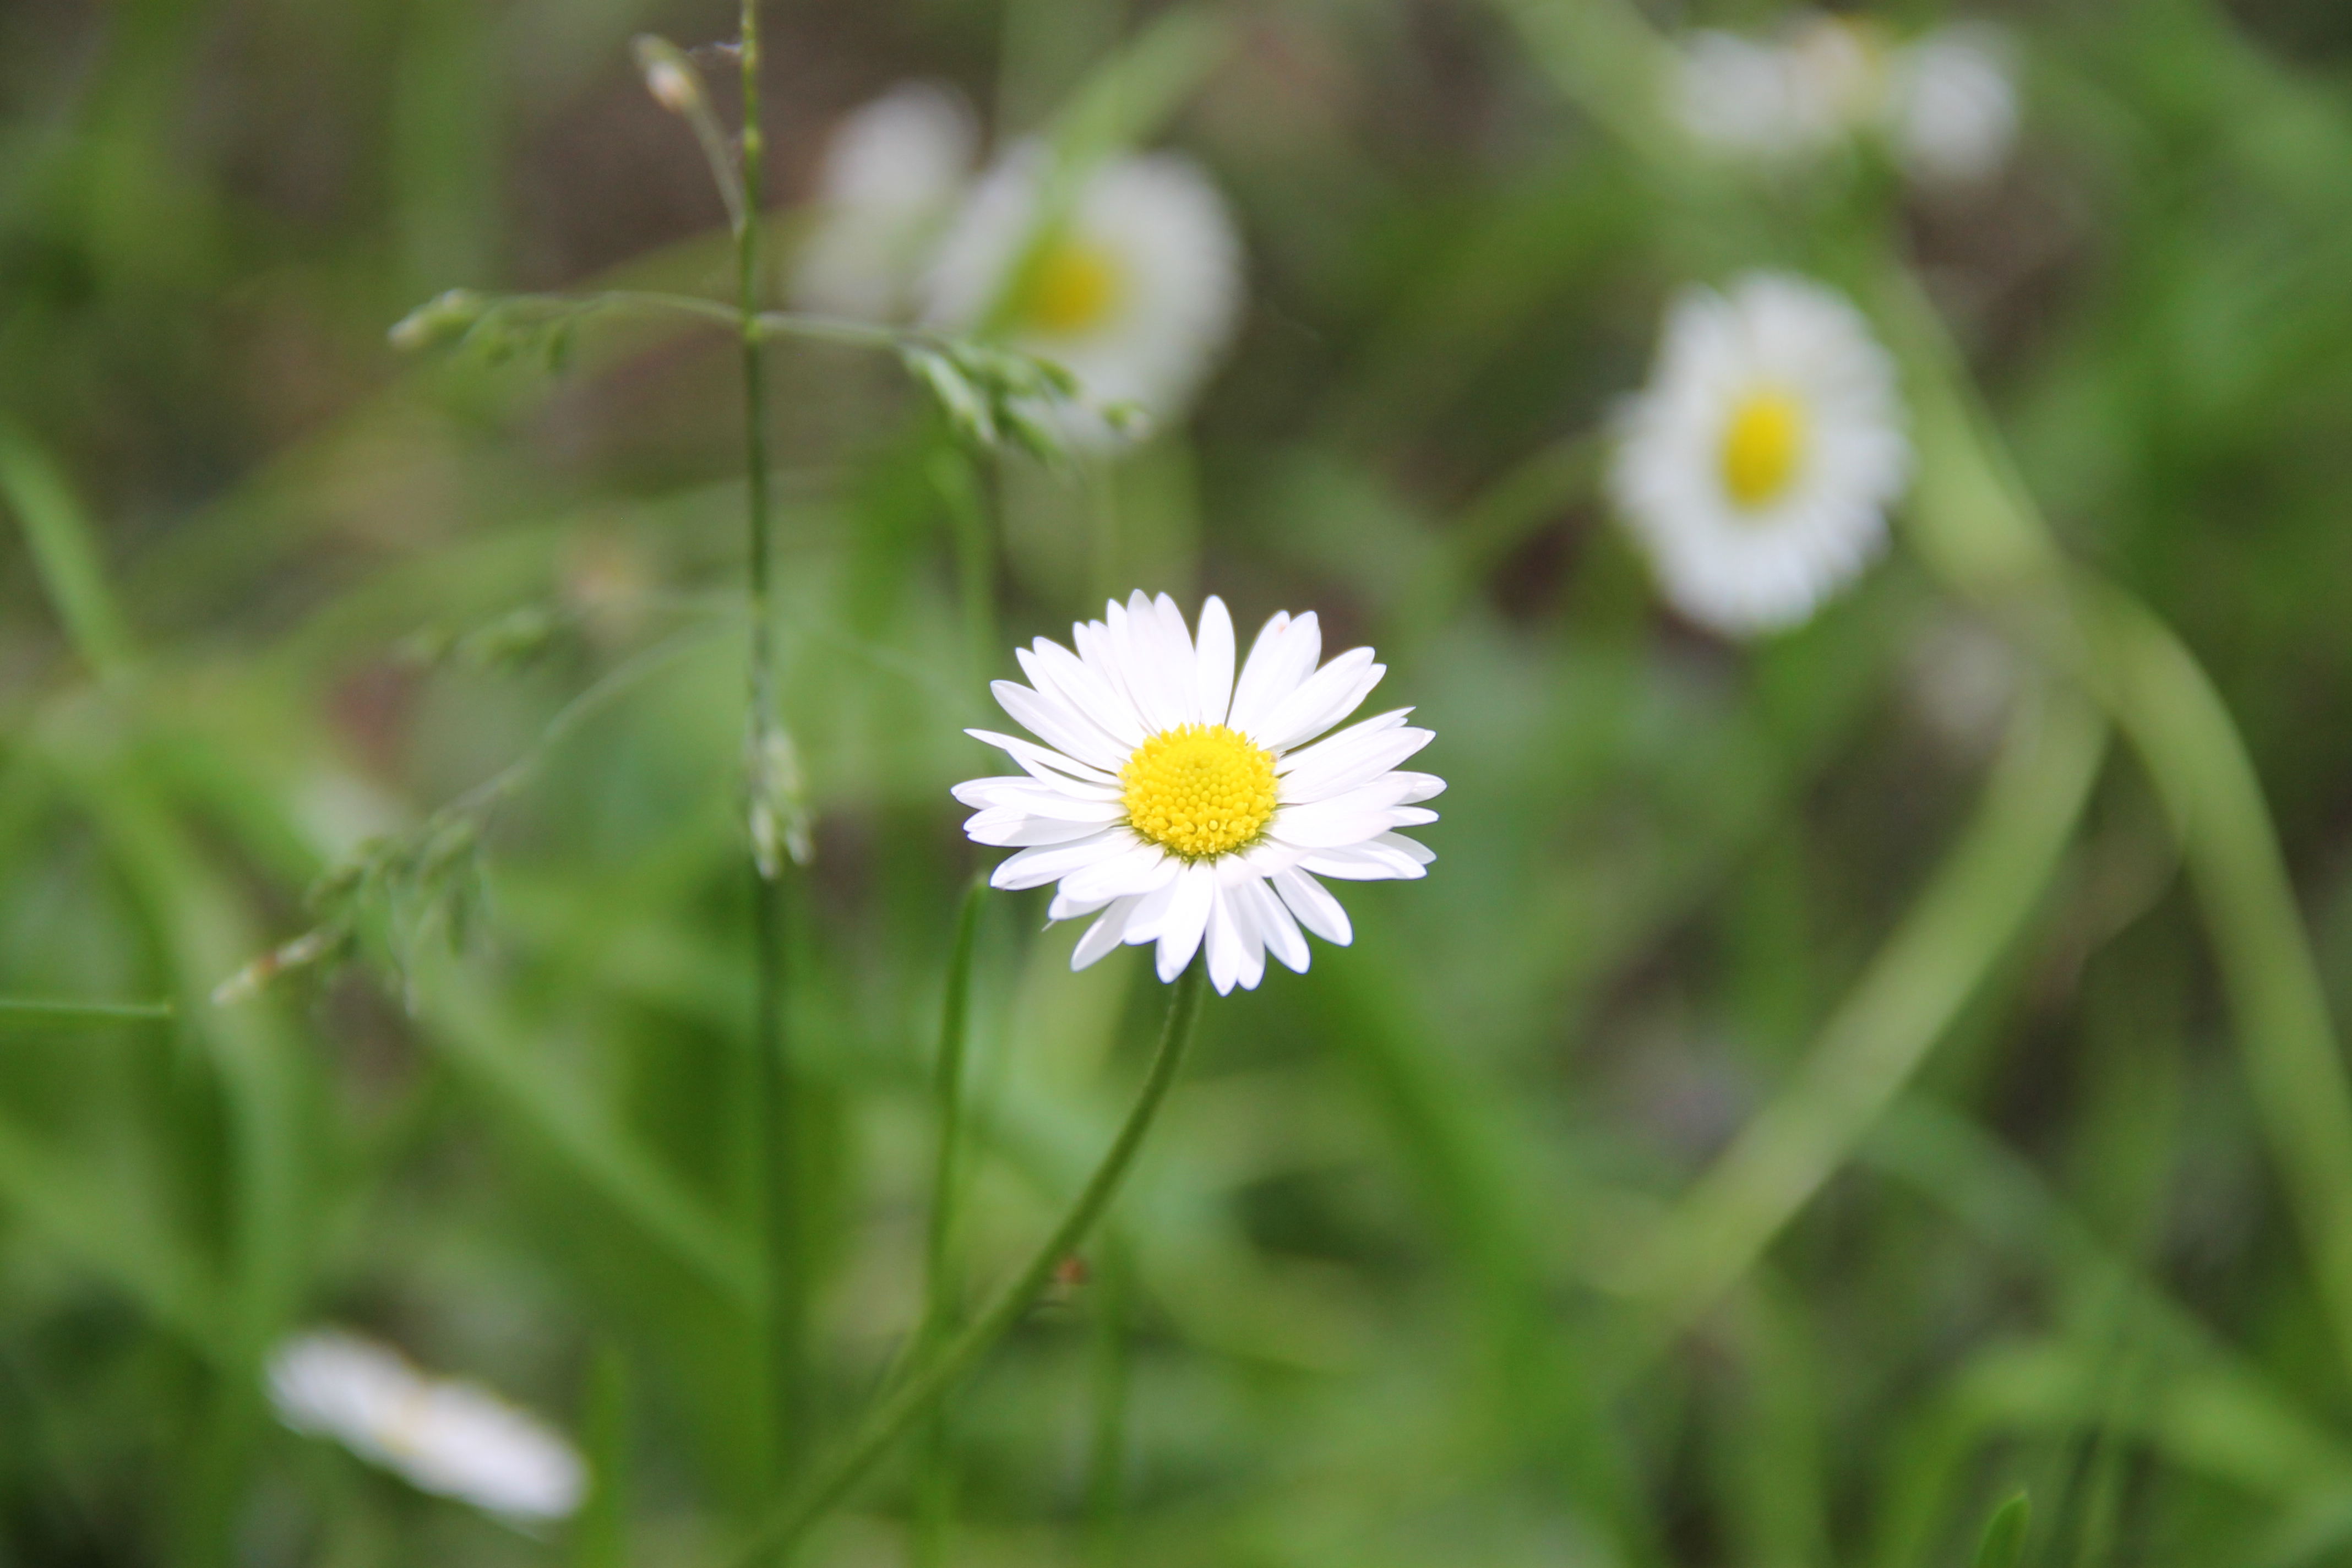 General 4272x2848 white flowers nature daisies macro closeup depth of field flowers blurry background blurred